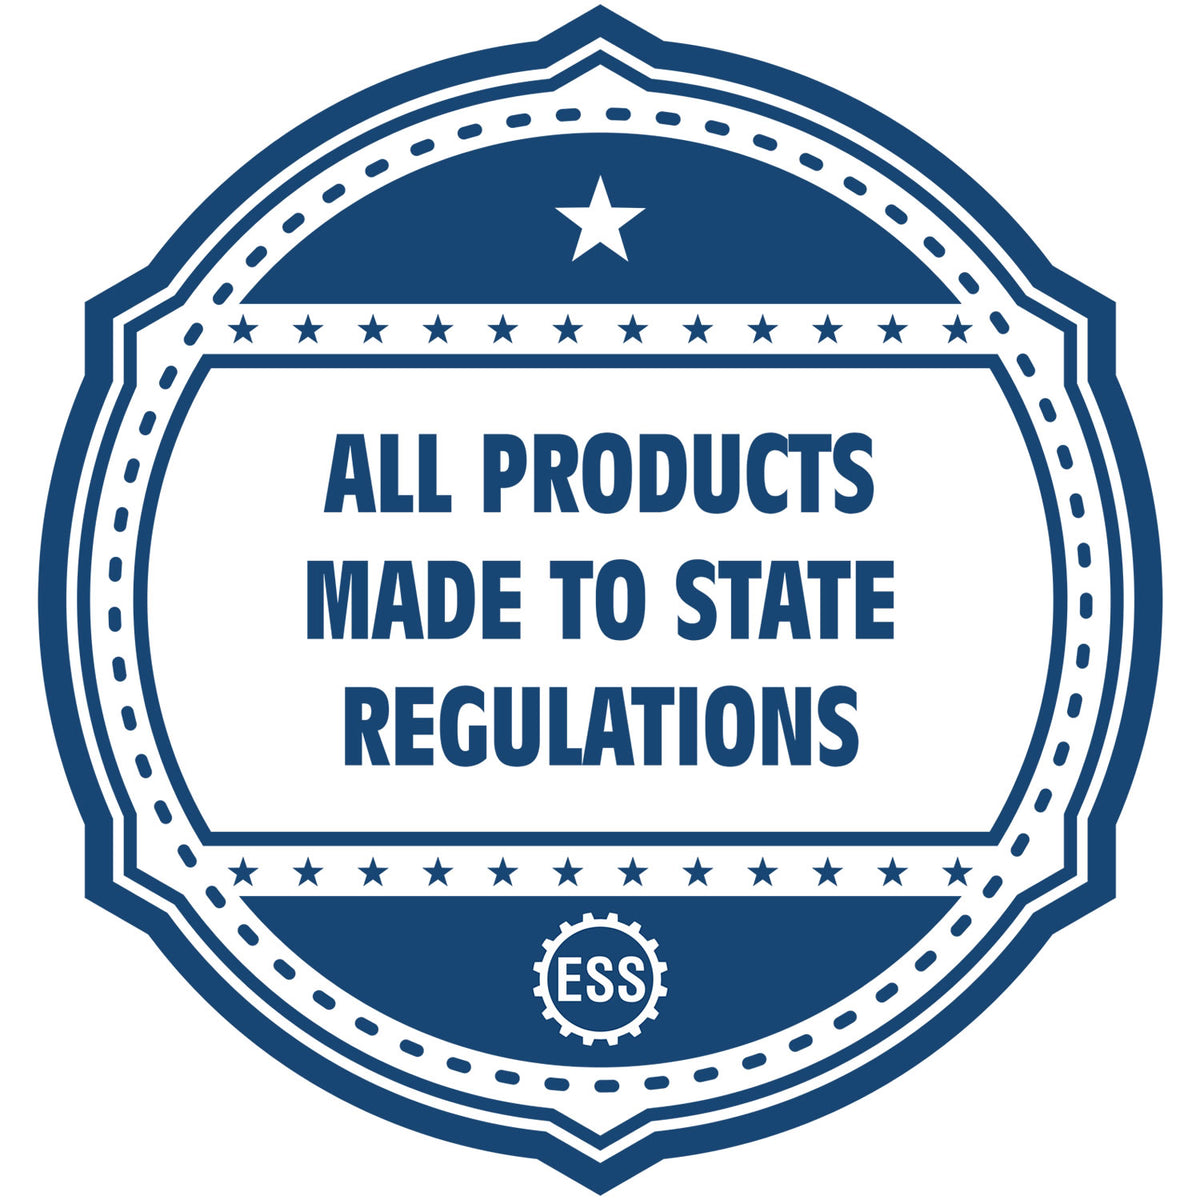 An icon or badge element for the Handheld Idaho Land Surveyor Seal showing that this product is made in compliance with state regulations.